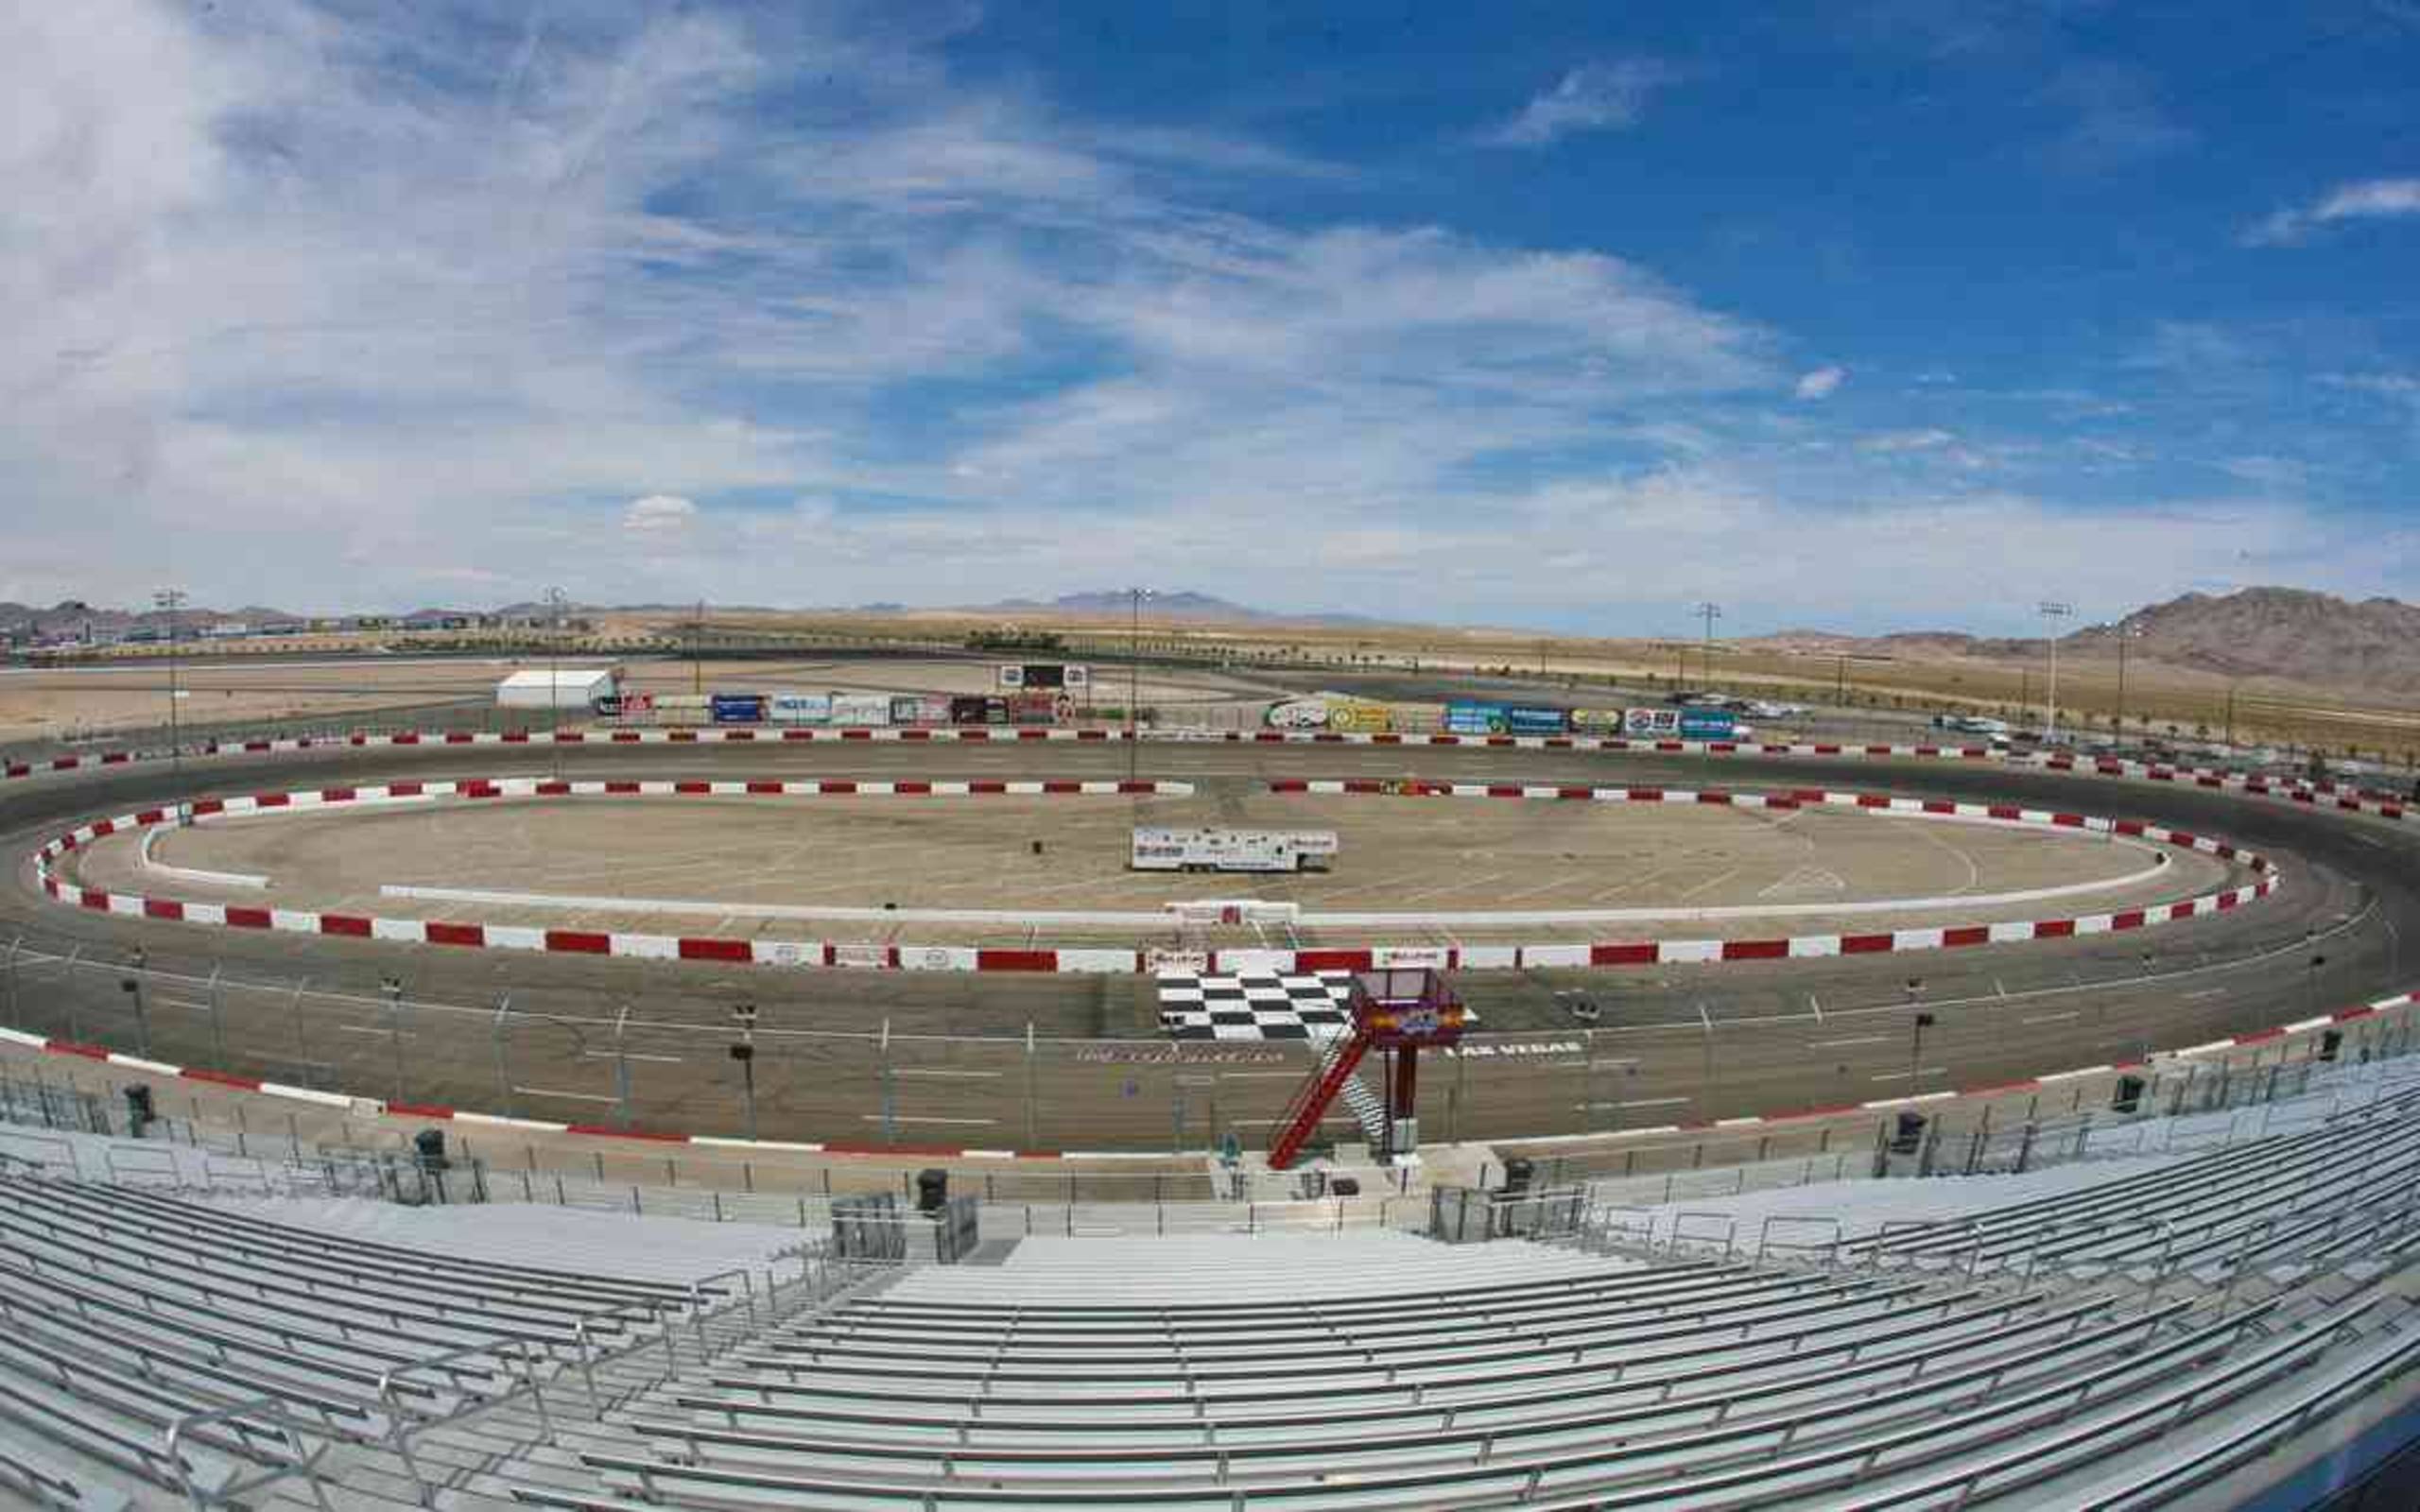 No Truck Series race for the Las Vegas Motor Speedway Bullring but